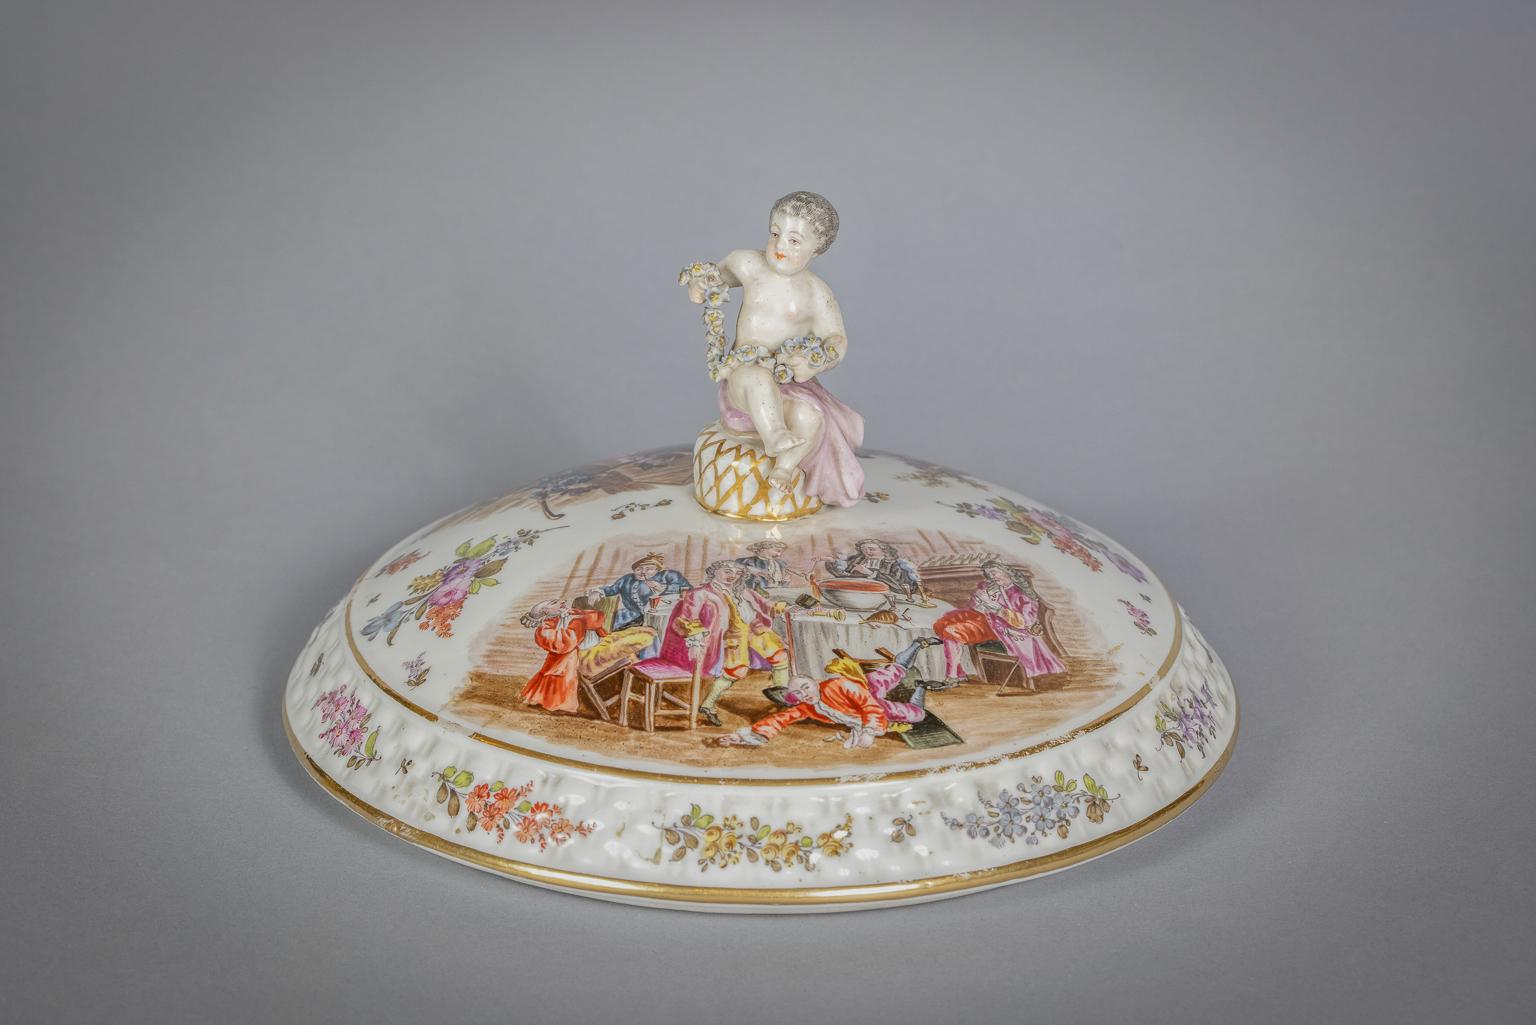 Bronze Mounted Berlin Porcelain Covered Centerpiece, circa 1875 For Sale 6